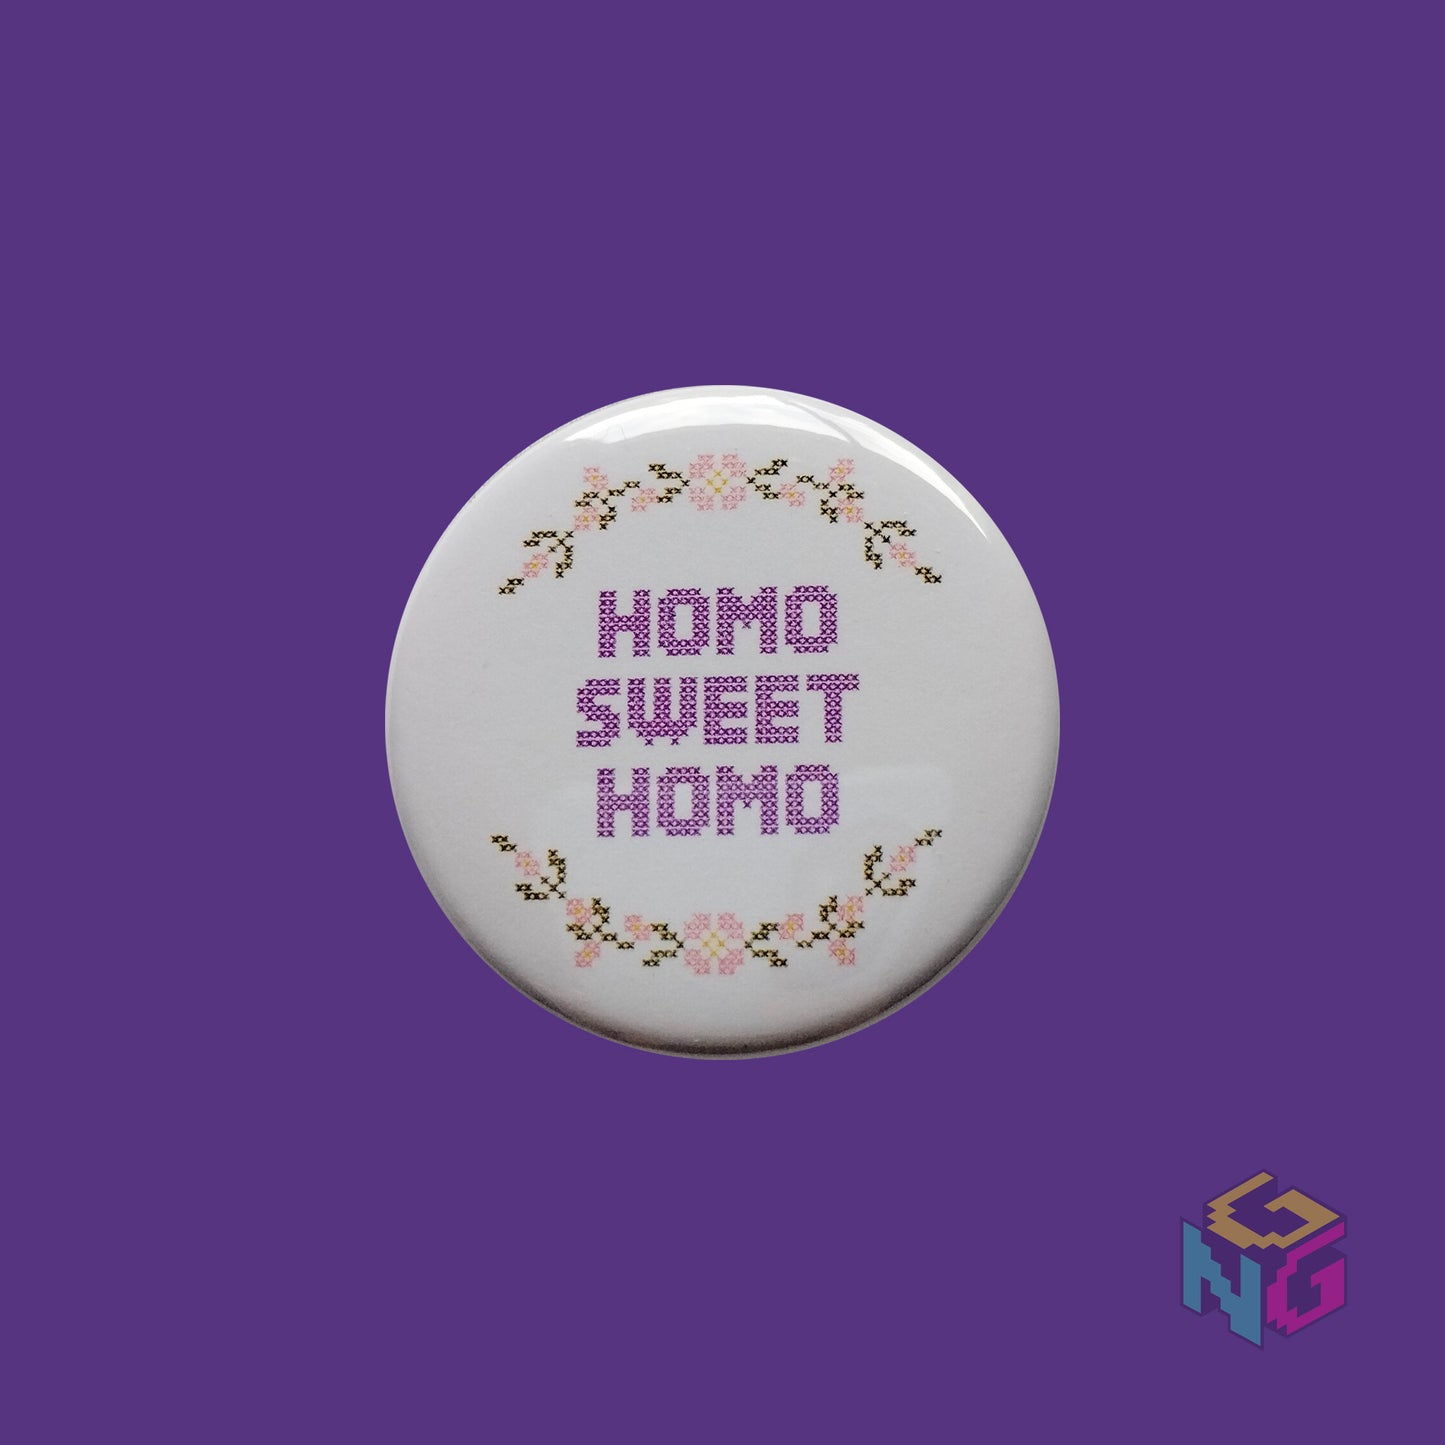 homo sweet homo button in front of purple background